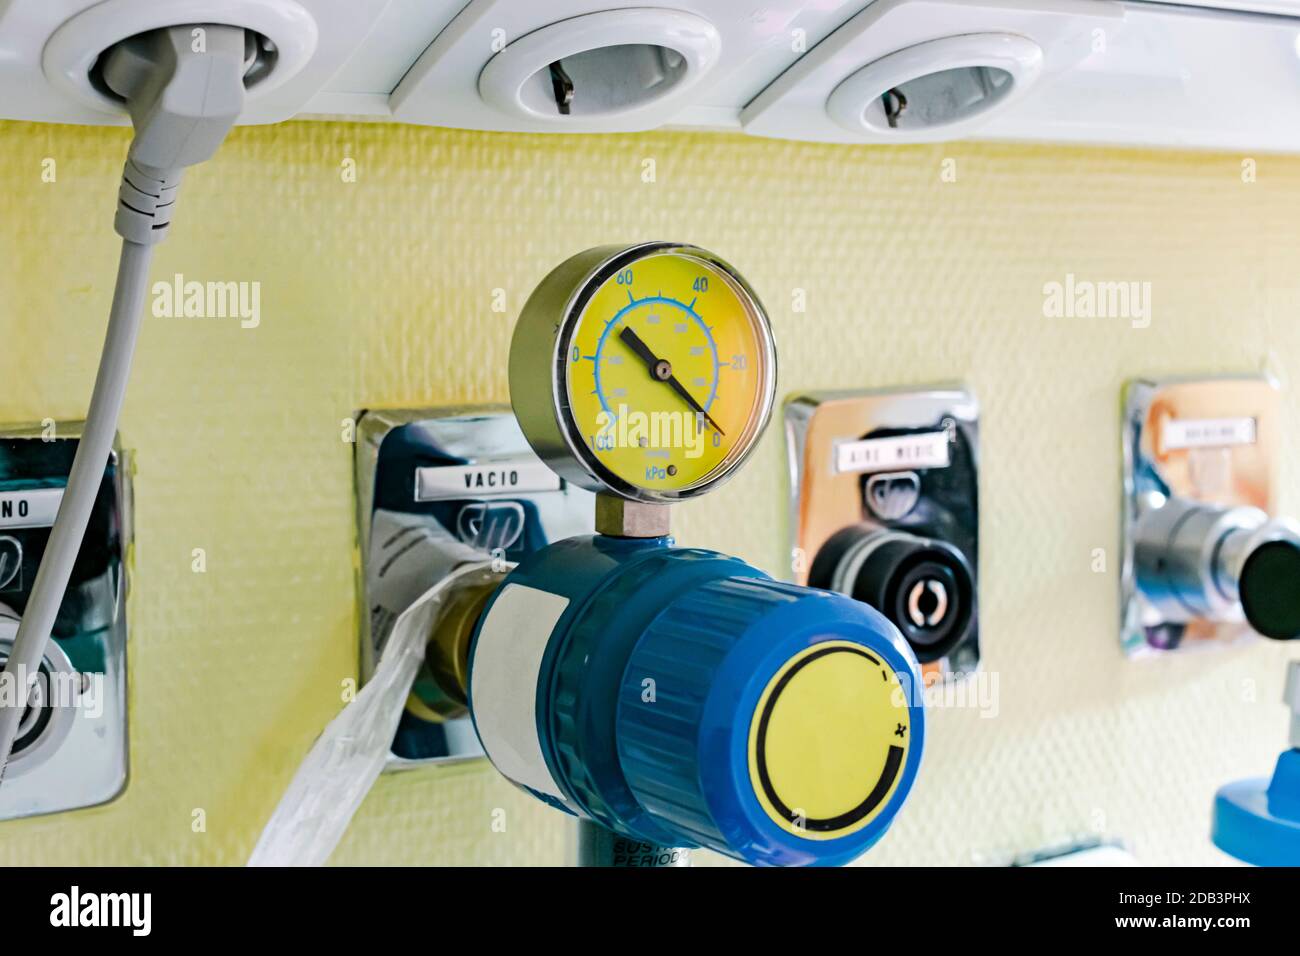 Pressure gauge with vacuum regulator and indicator clock to connect a suction pump in a hospital room Stock Photo